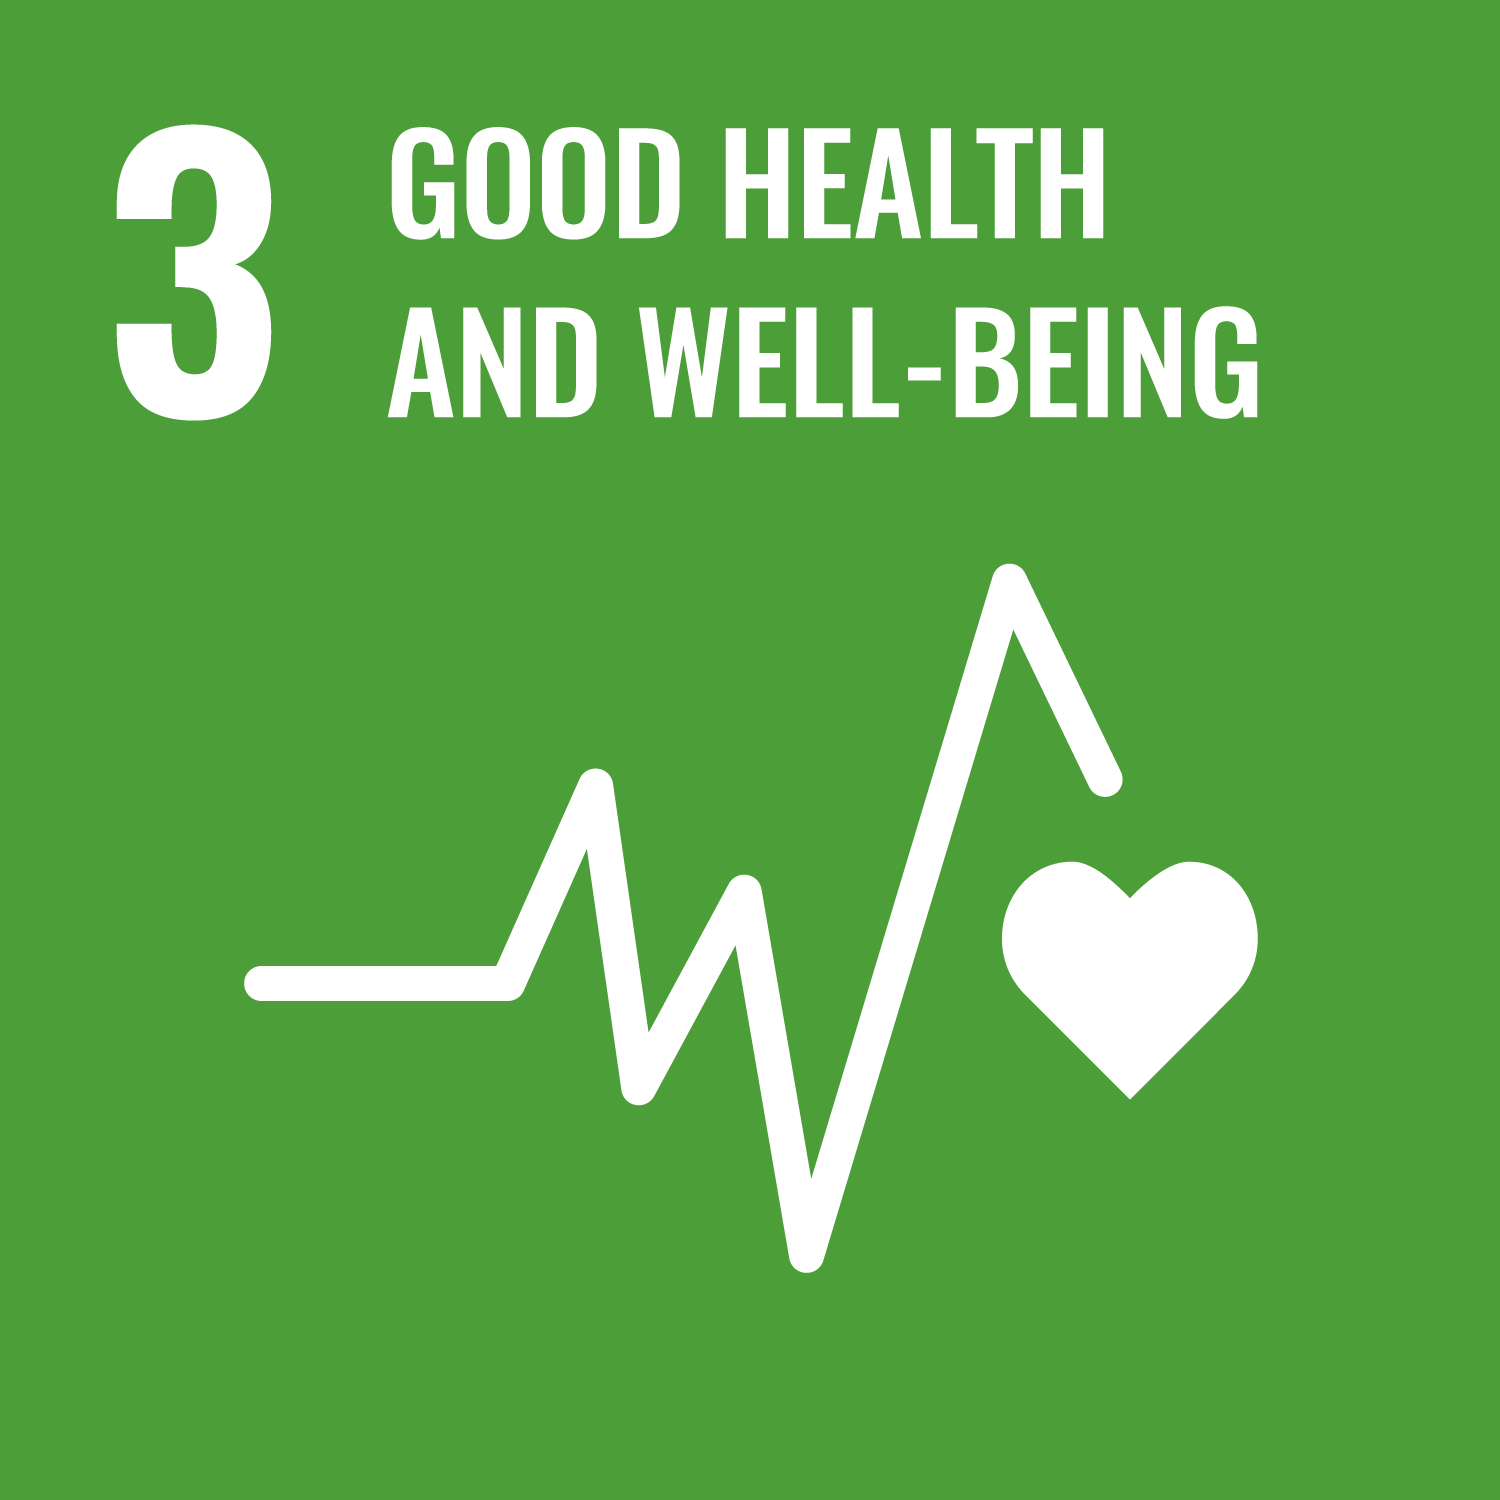 UN Compact Goal 3 icon "Good Health and Well-Being"